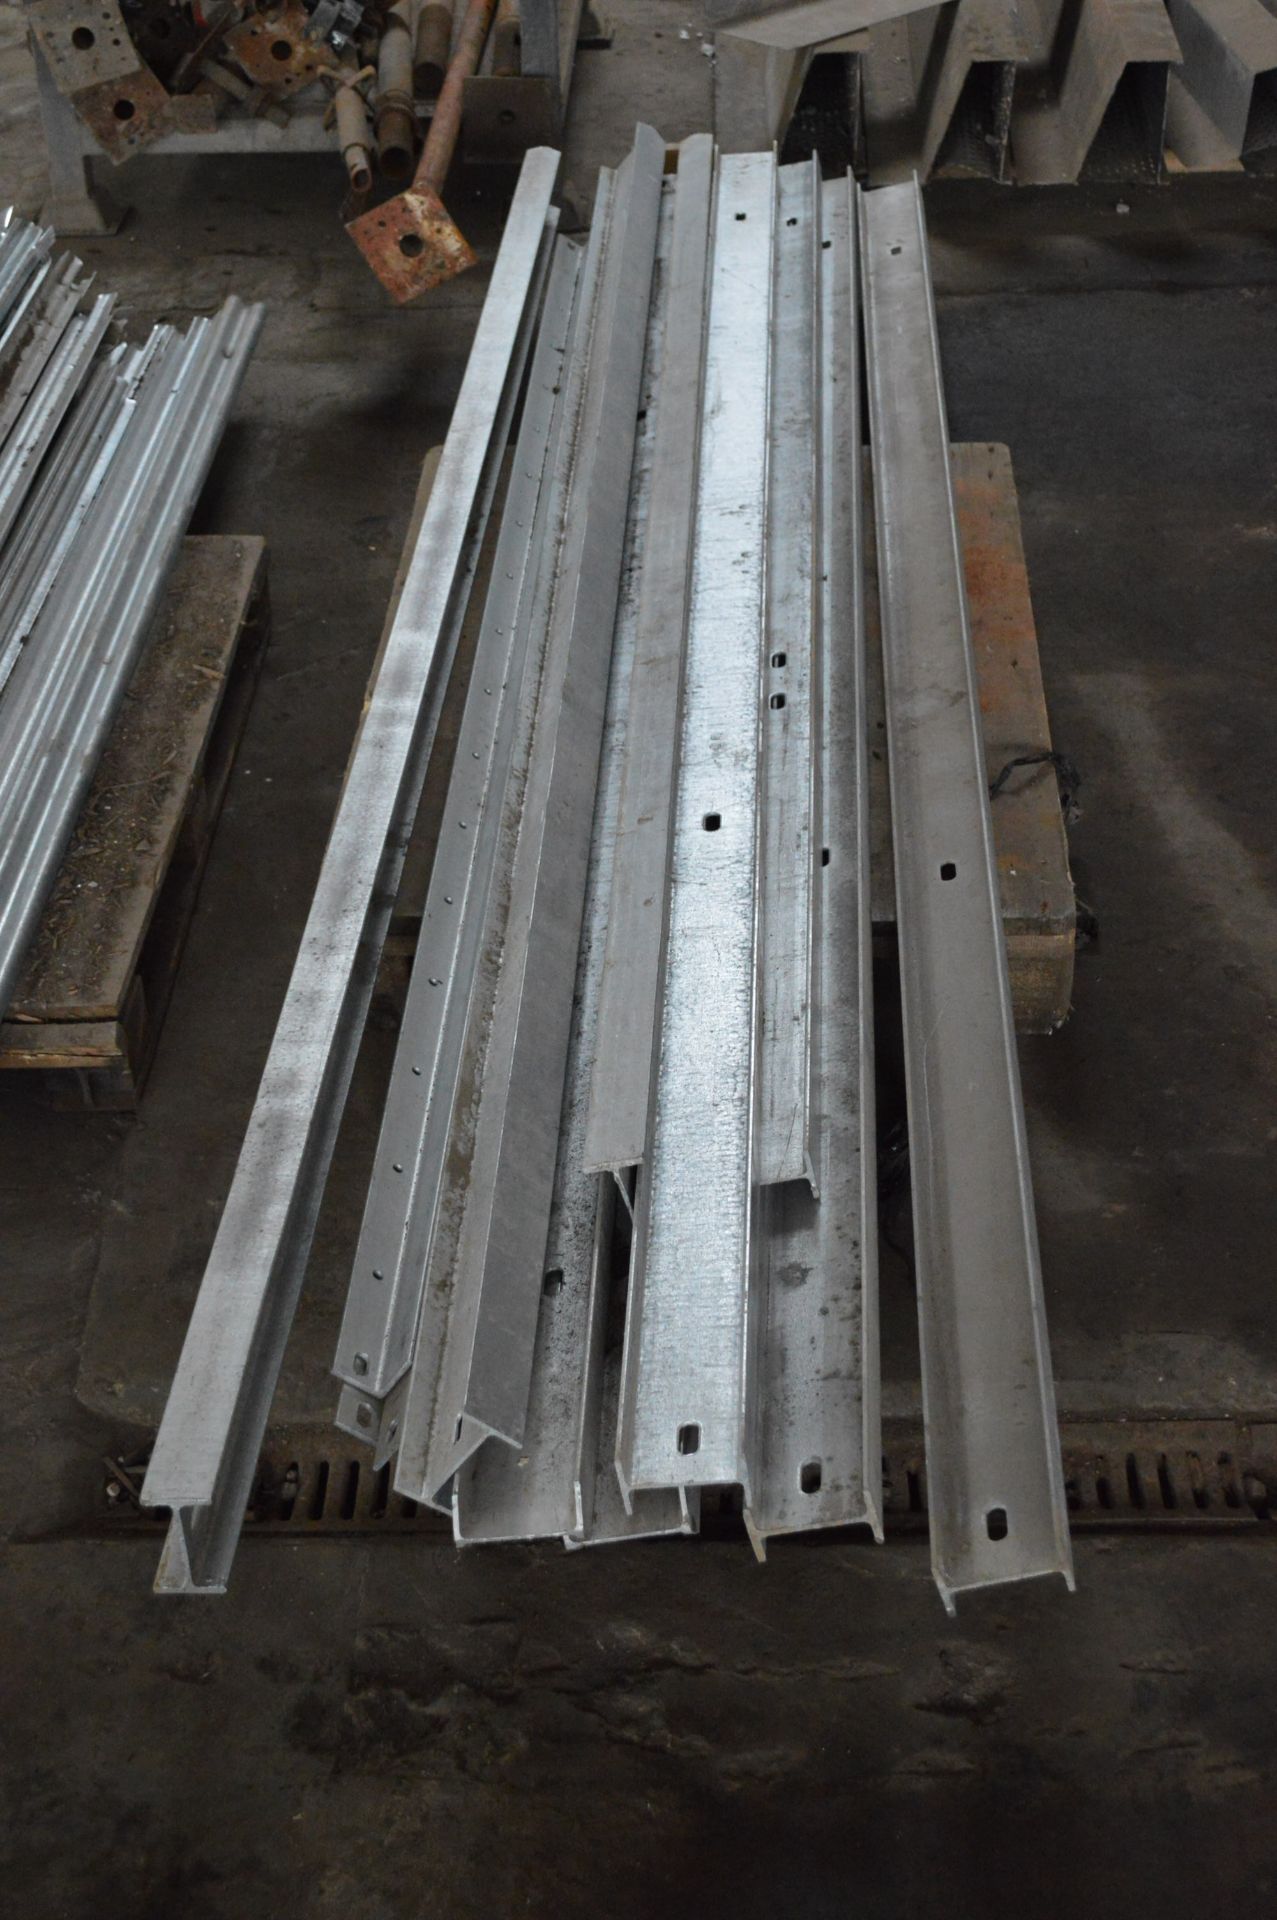 Palisade Fencing Components, as set out on three pallets - Image 4 of 4